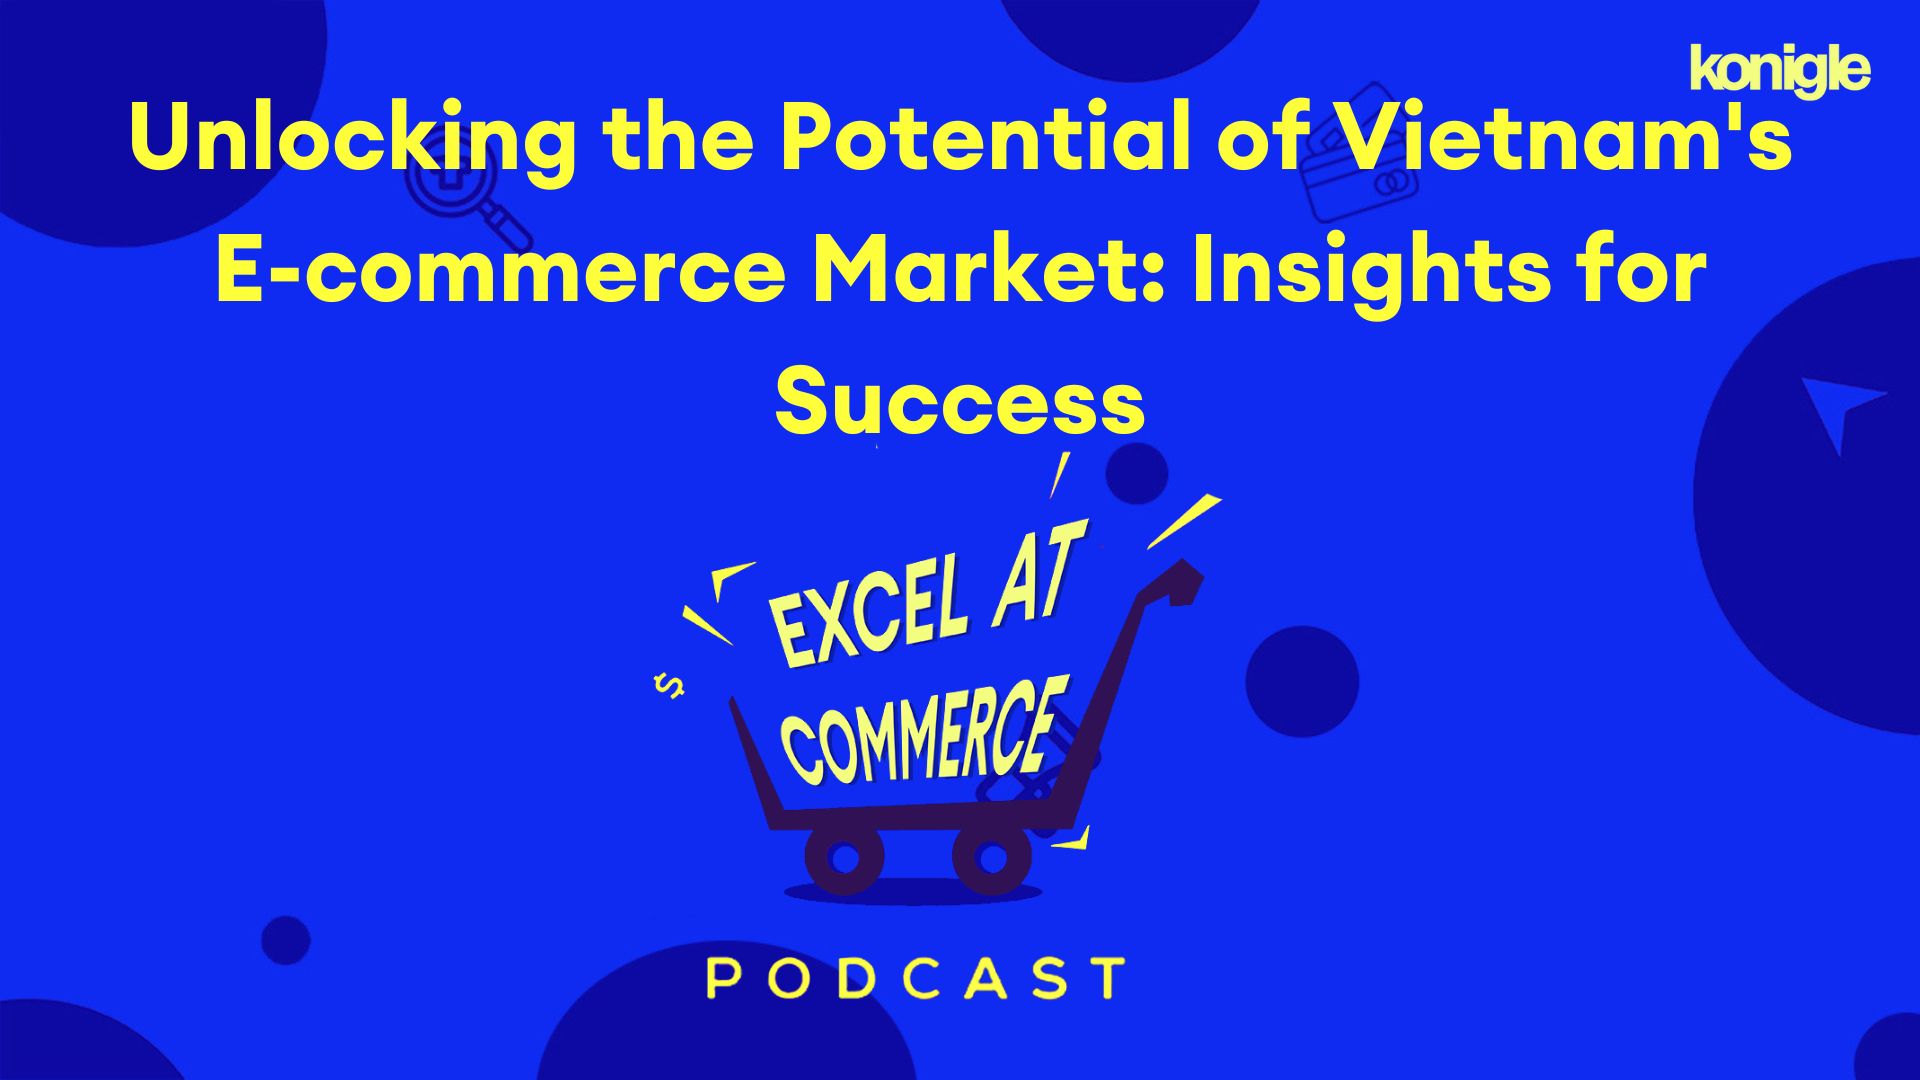 Unlocking the Potential of Vietnam's E-commerce Market: Insights for Success